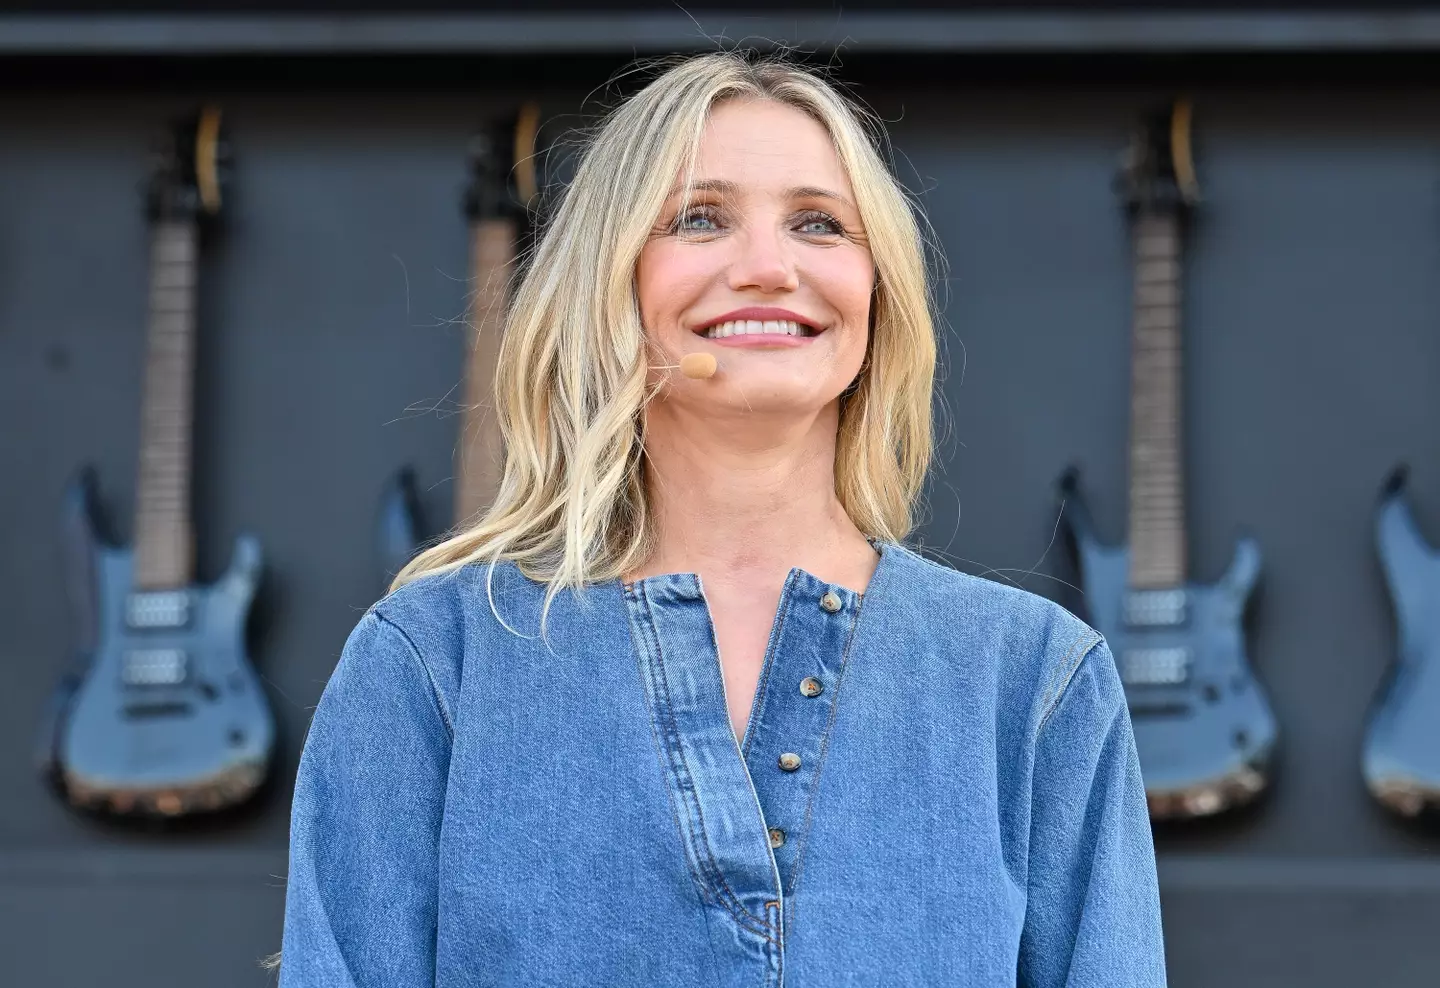 Cameron Diaz ignores one basic rule of human hygiene. (Steve Jennings/Getty Images)